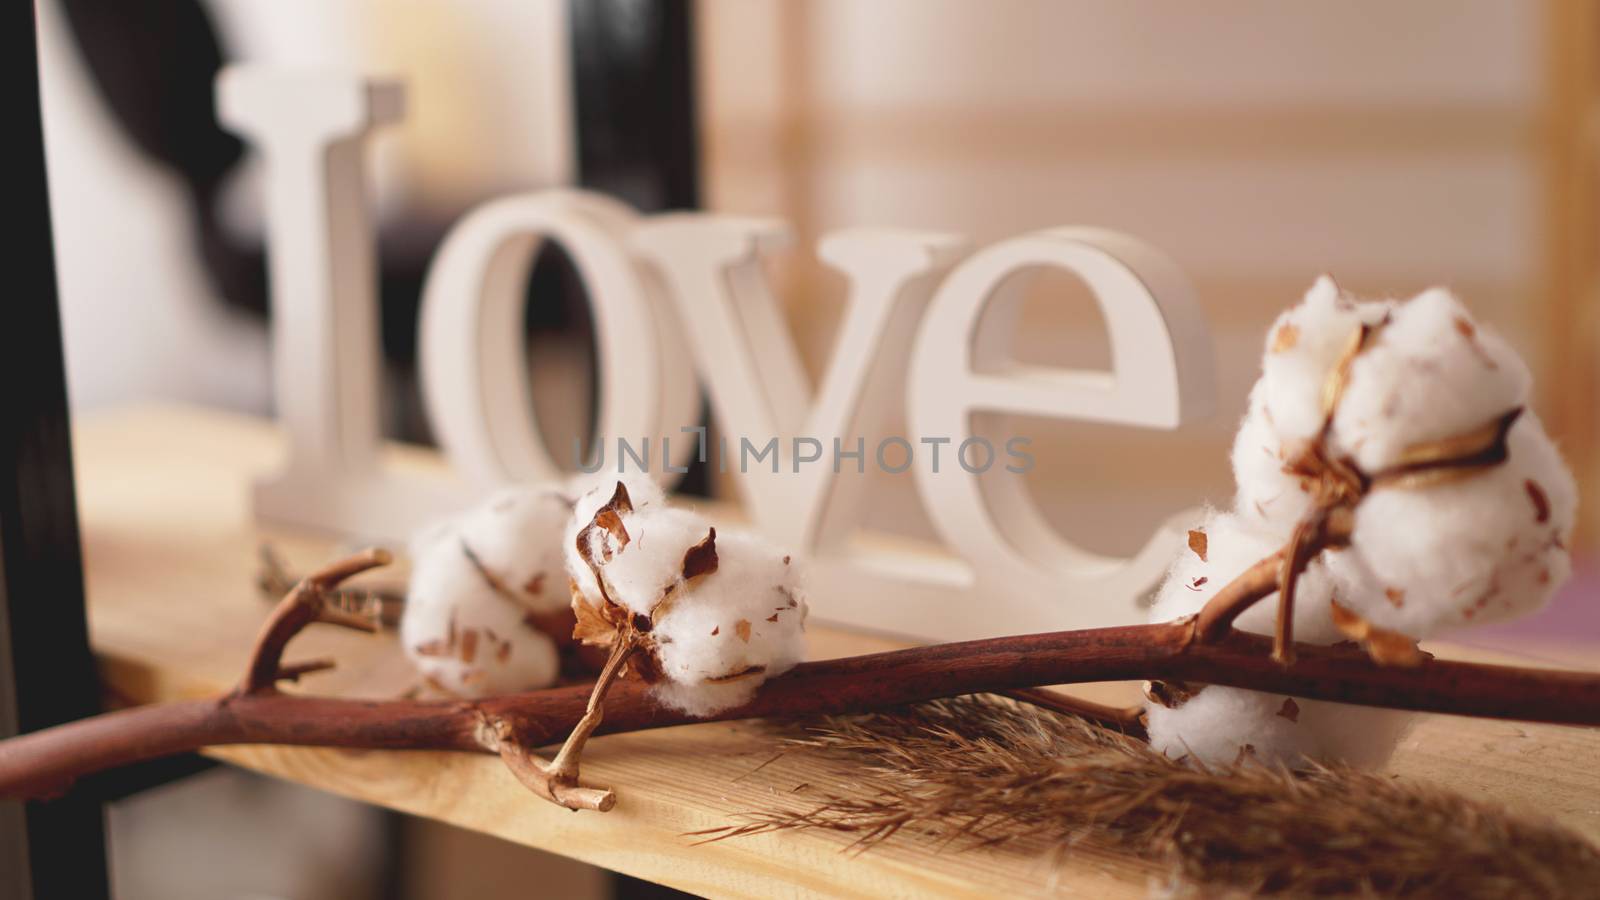 Love wooden letters, vintage styled and cotton flower - blurred background for banner and invitation card